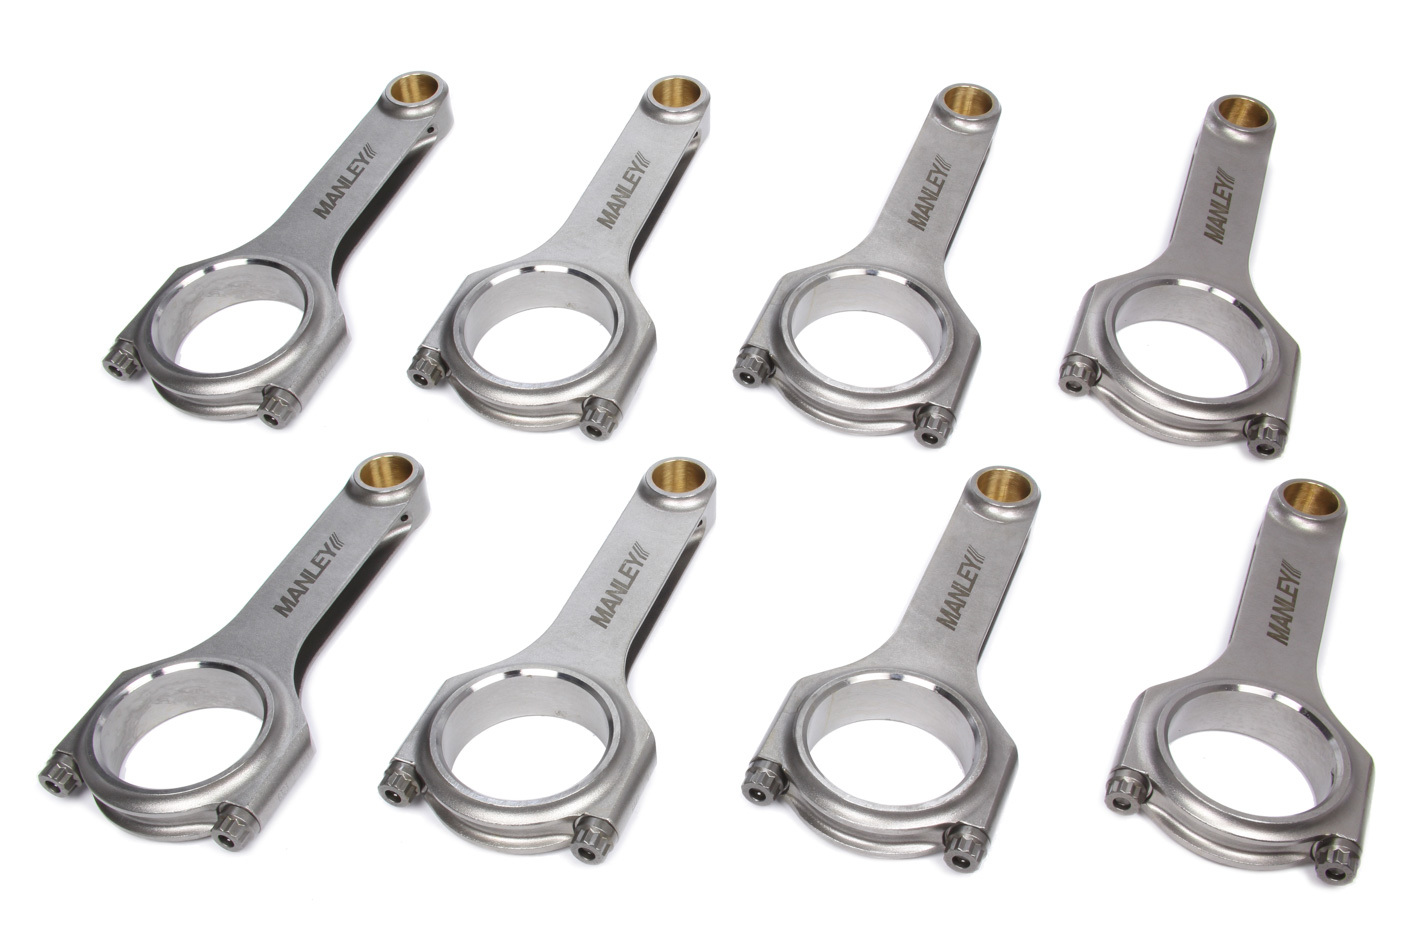 Manley 14042R-8 - Connecting Rod, H Beam, 5.933 in Long, Bushed, 3/8 in Cap Screws, ARP2000, Ford Modular, Set of 8